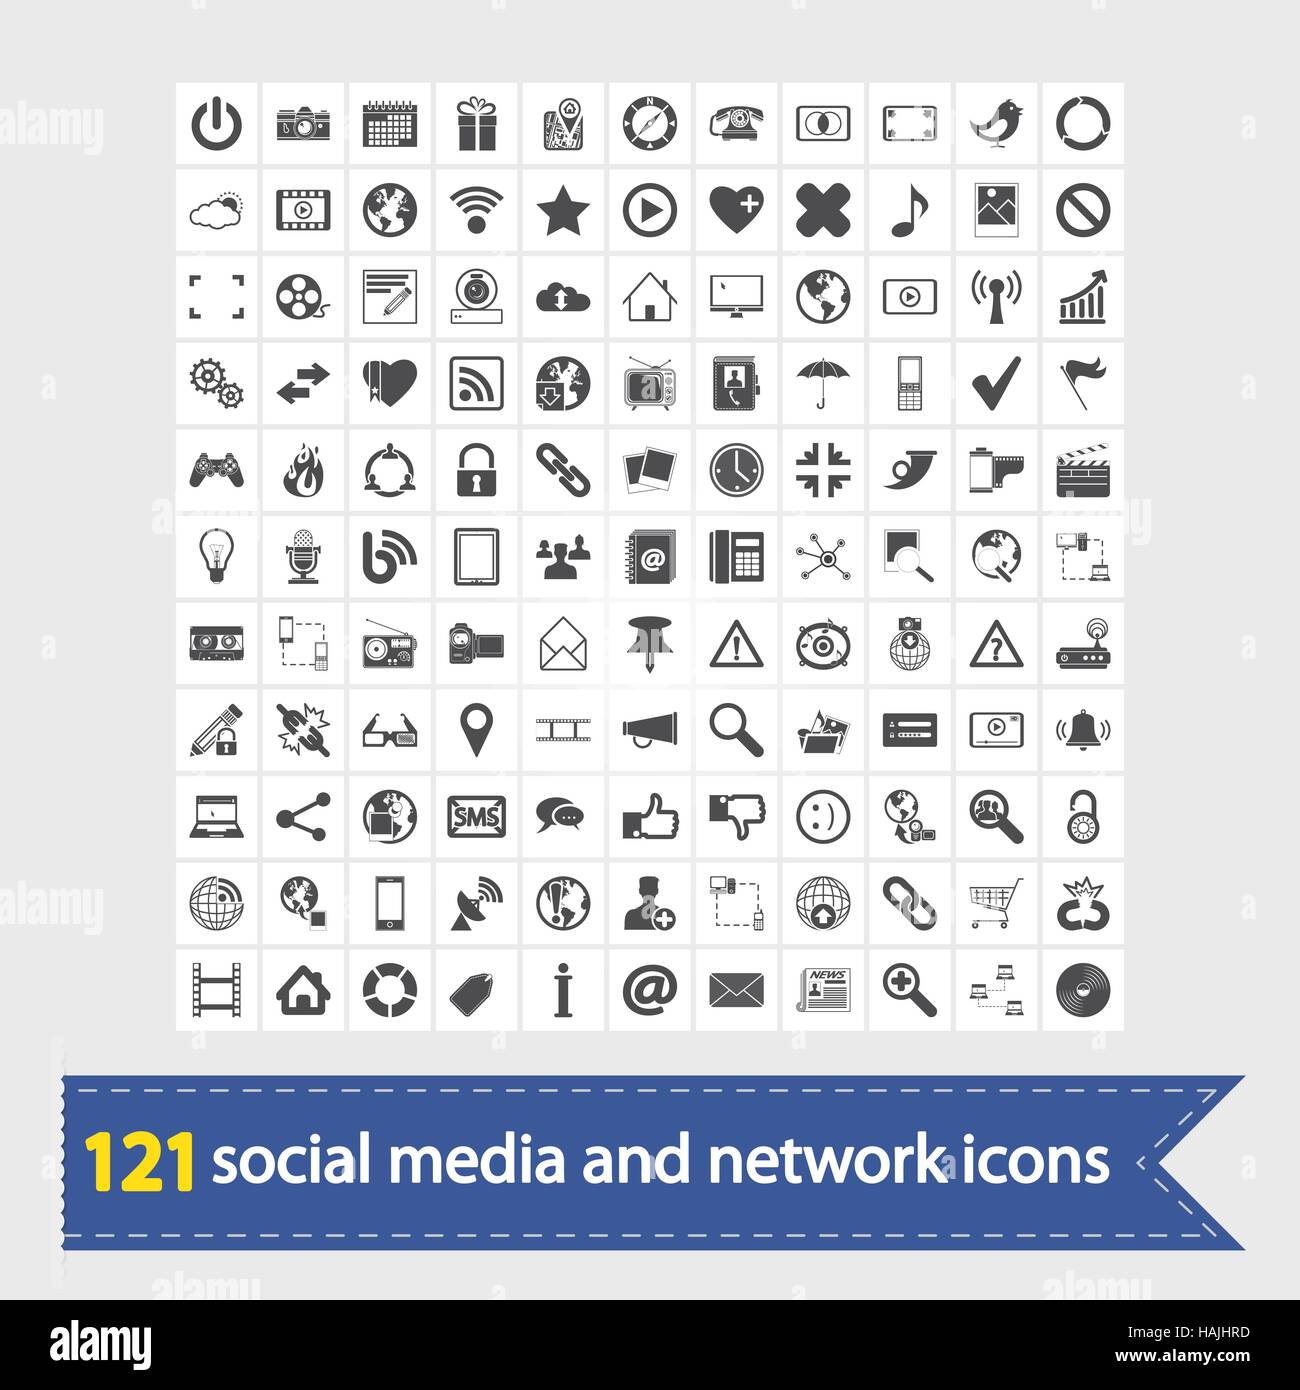 121 Social media and network icons. Vector illustration. Stock Vector